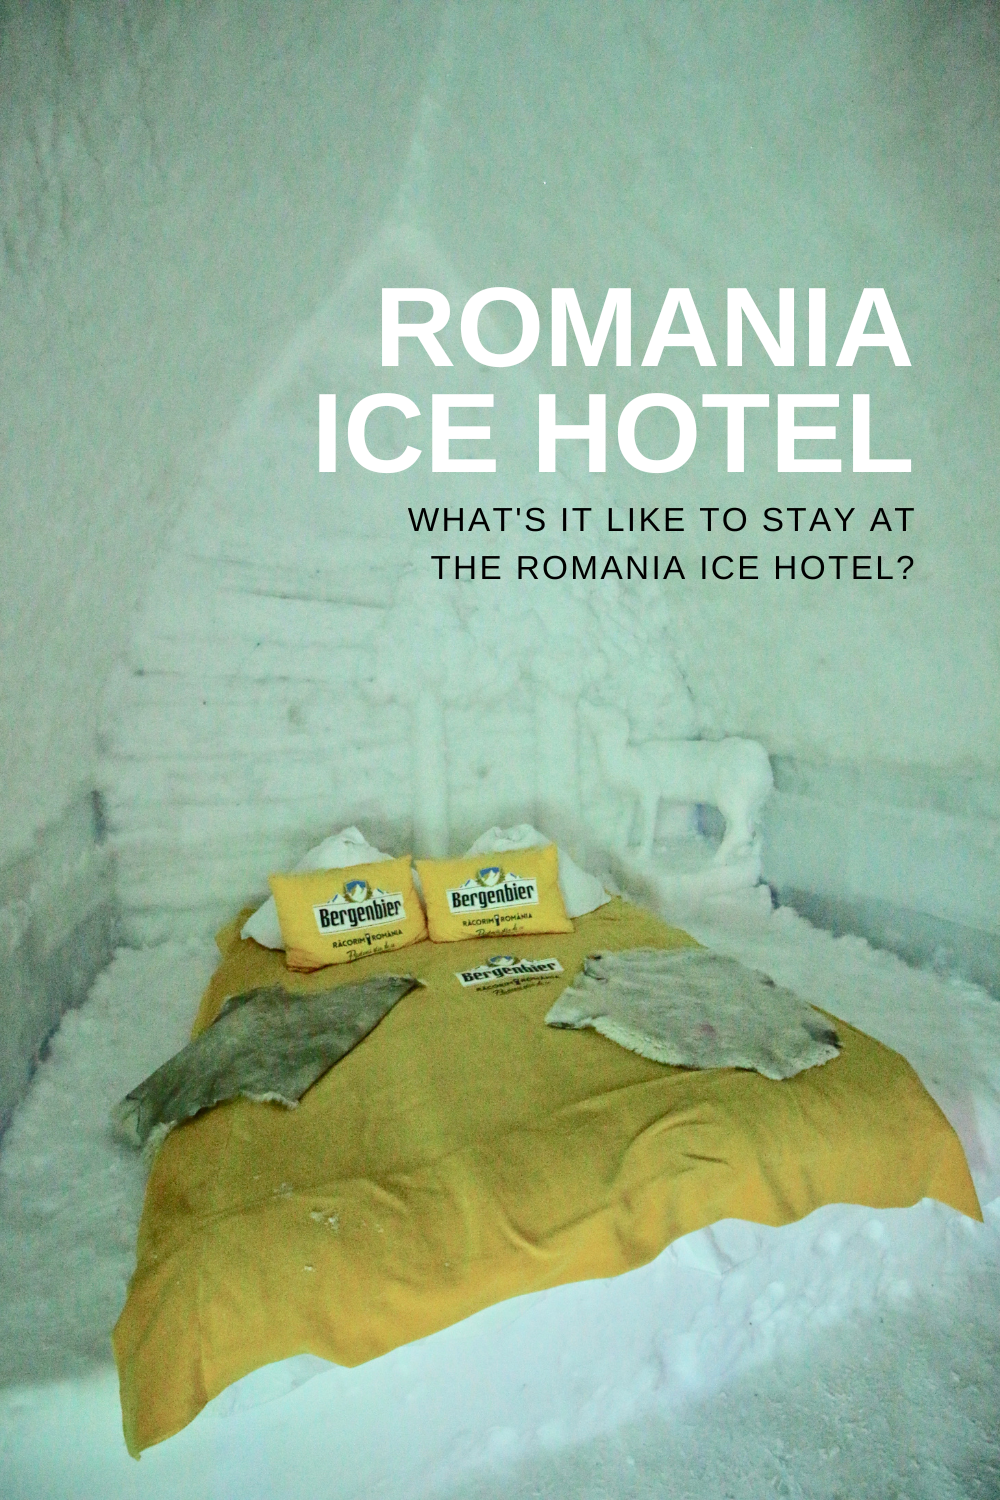 What's it like to stay at the Romania Ice Hotel?